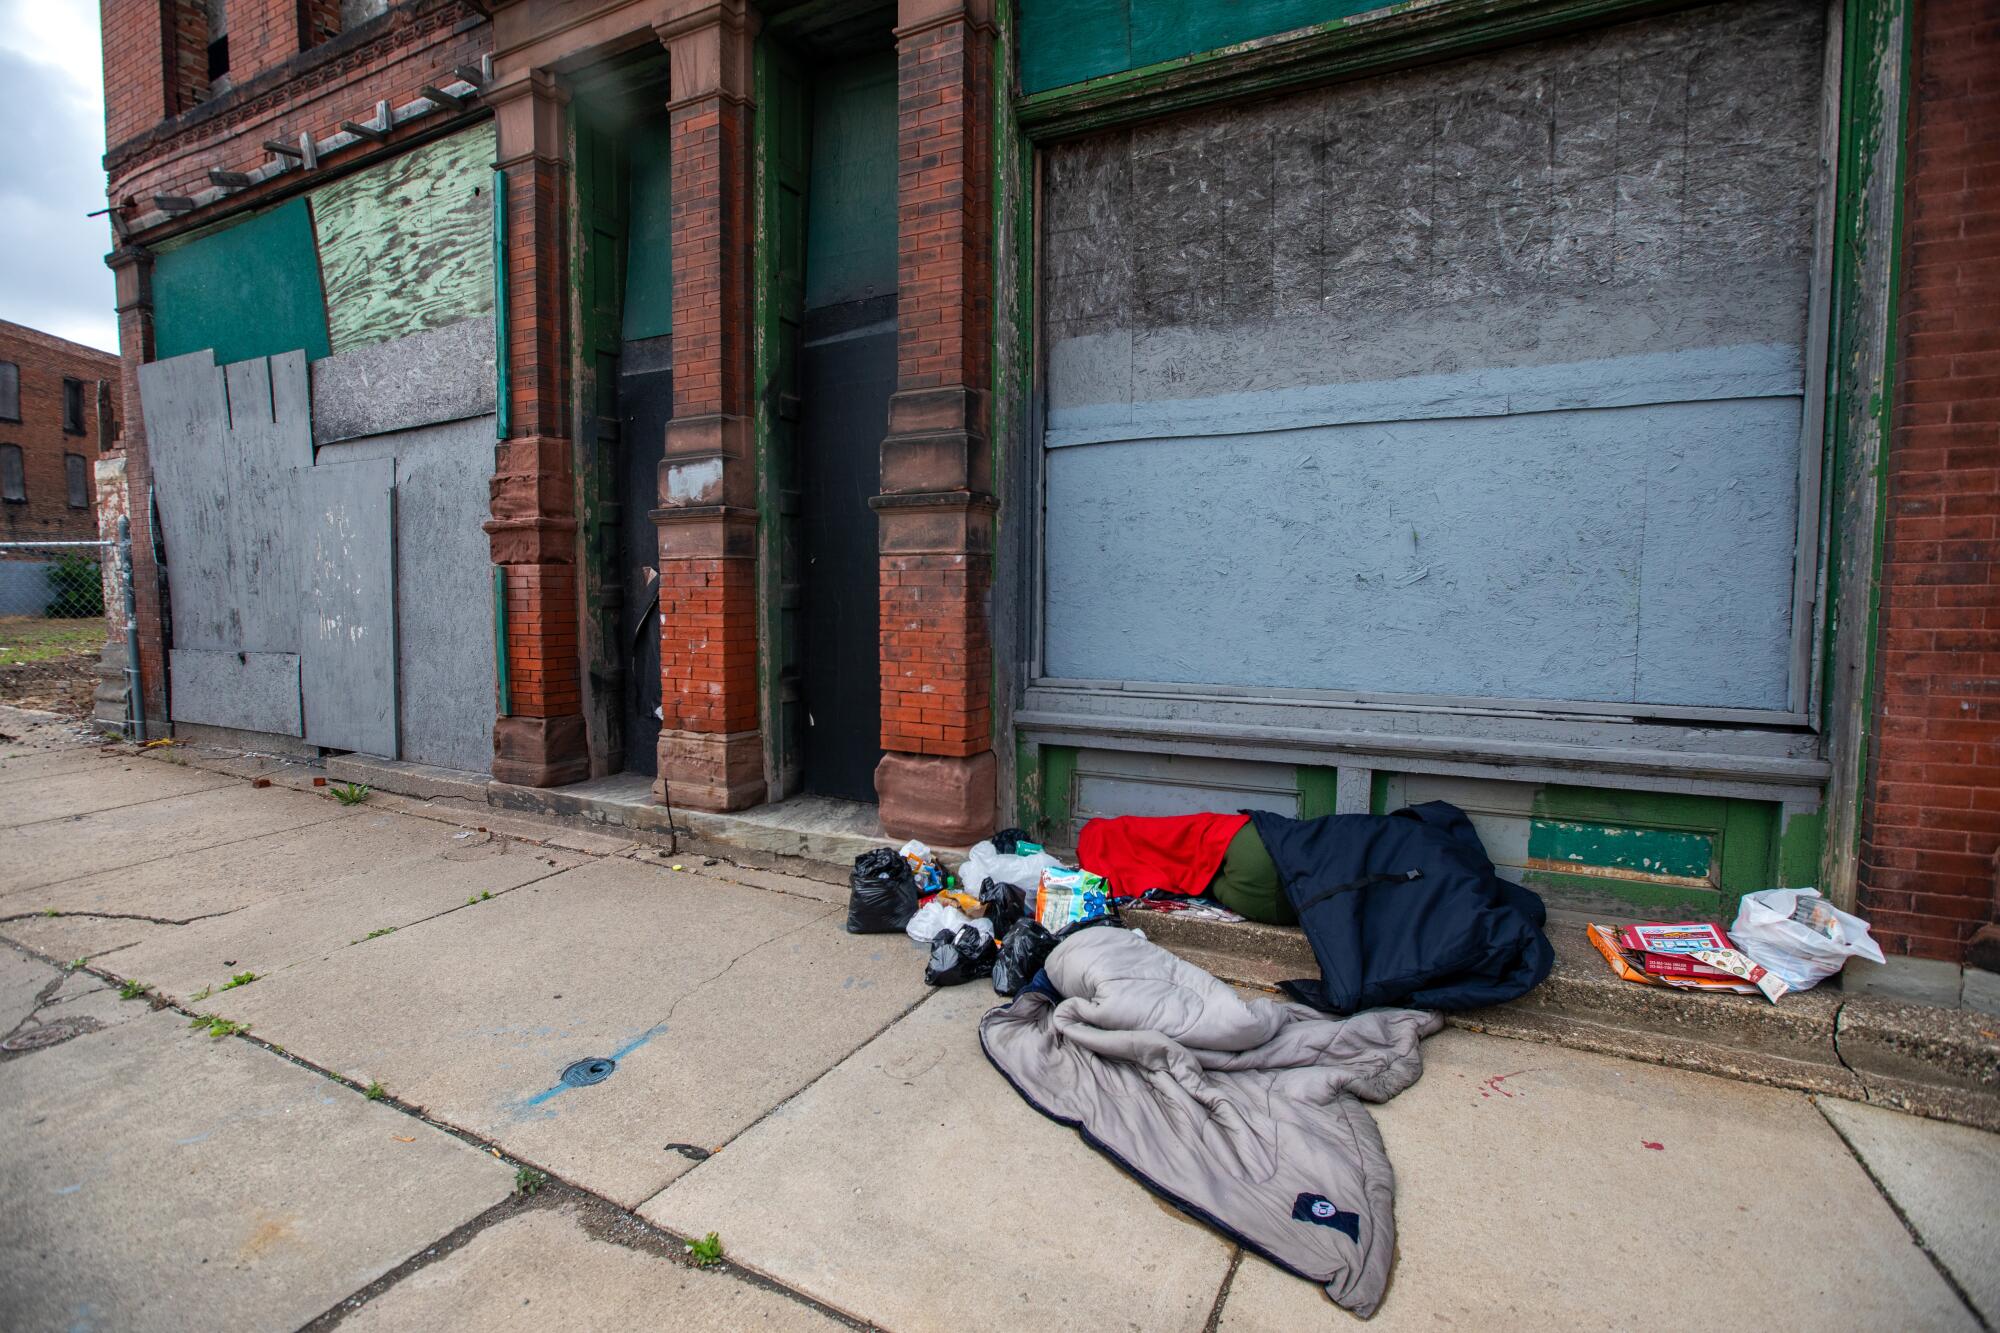 A person sleeps under a coat in front of an abandoned building in Detroit.